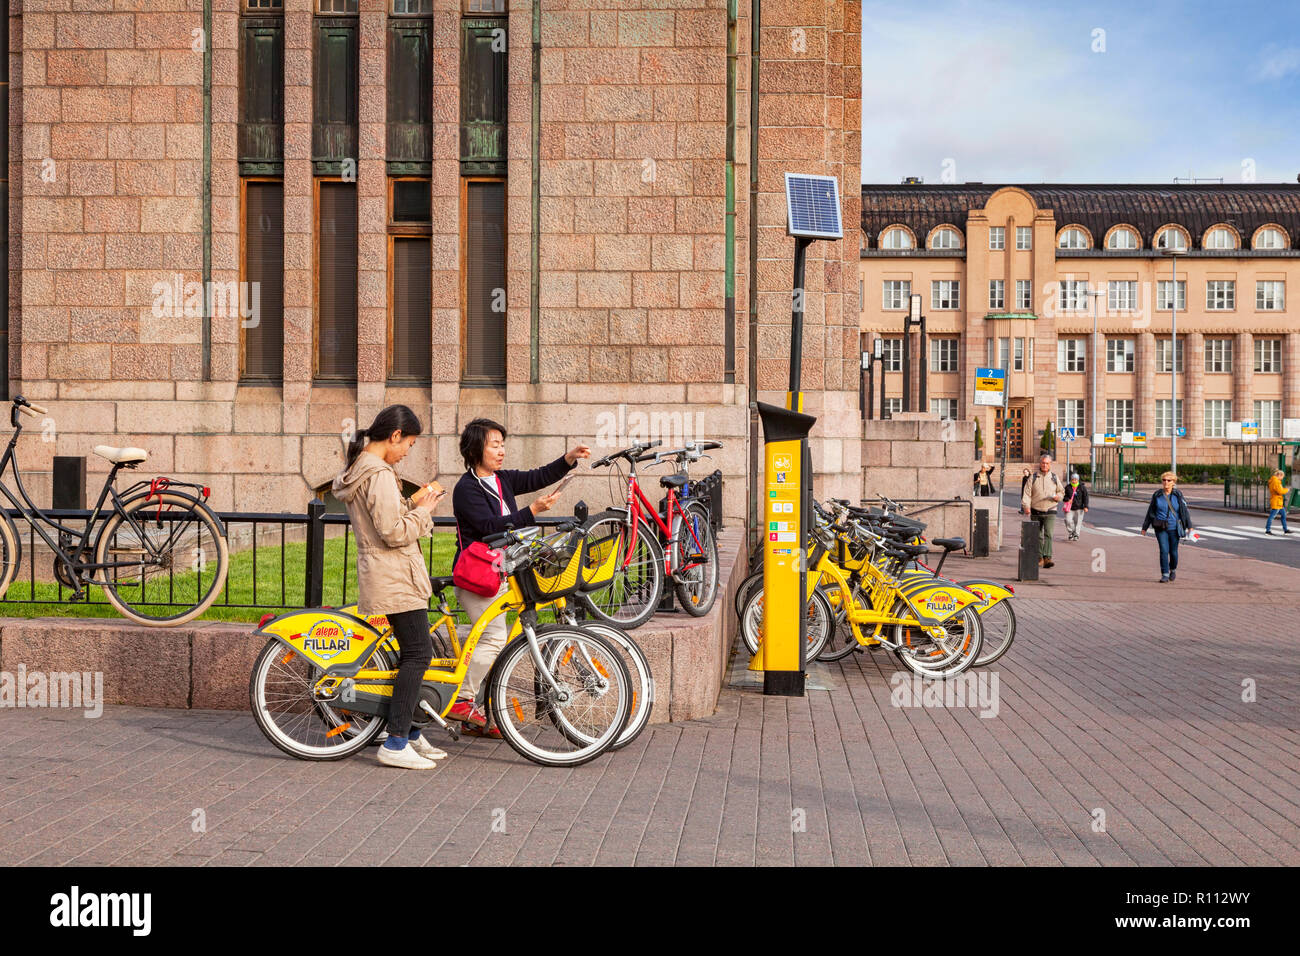 20 September 2018: Helsinki, Finland - Two female Asian tourists using yellow Alepa city bikes whilst using tablet to check map, at the central Railwa Stock Photo